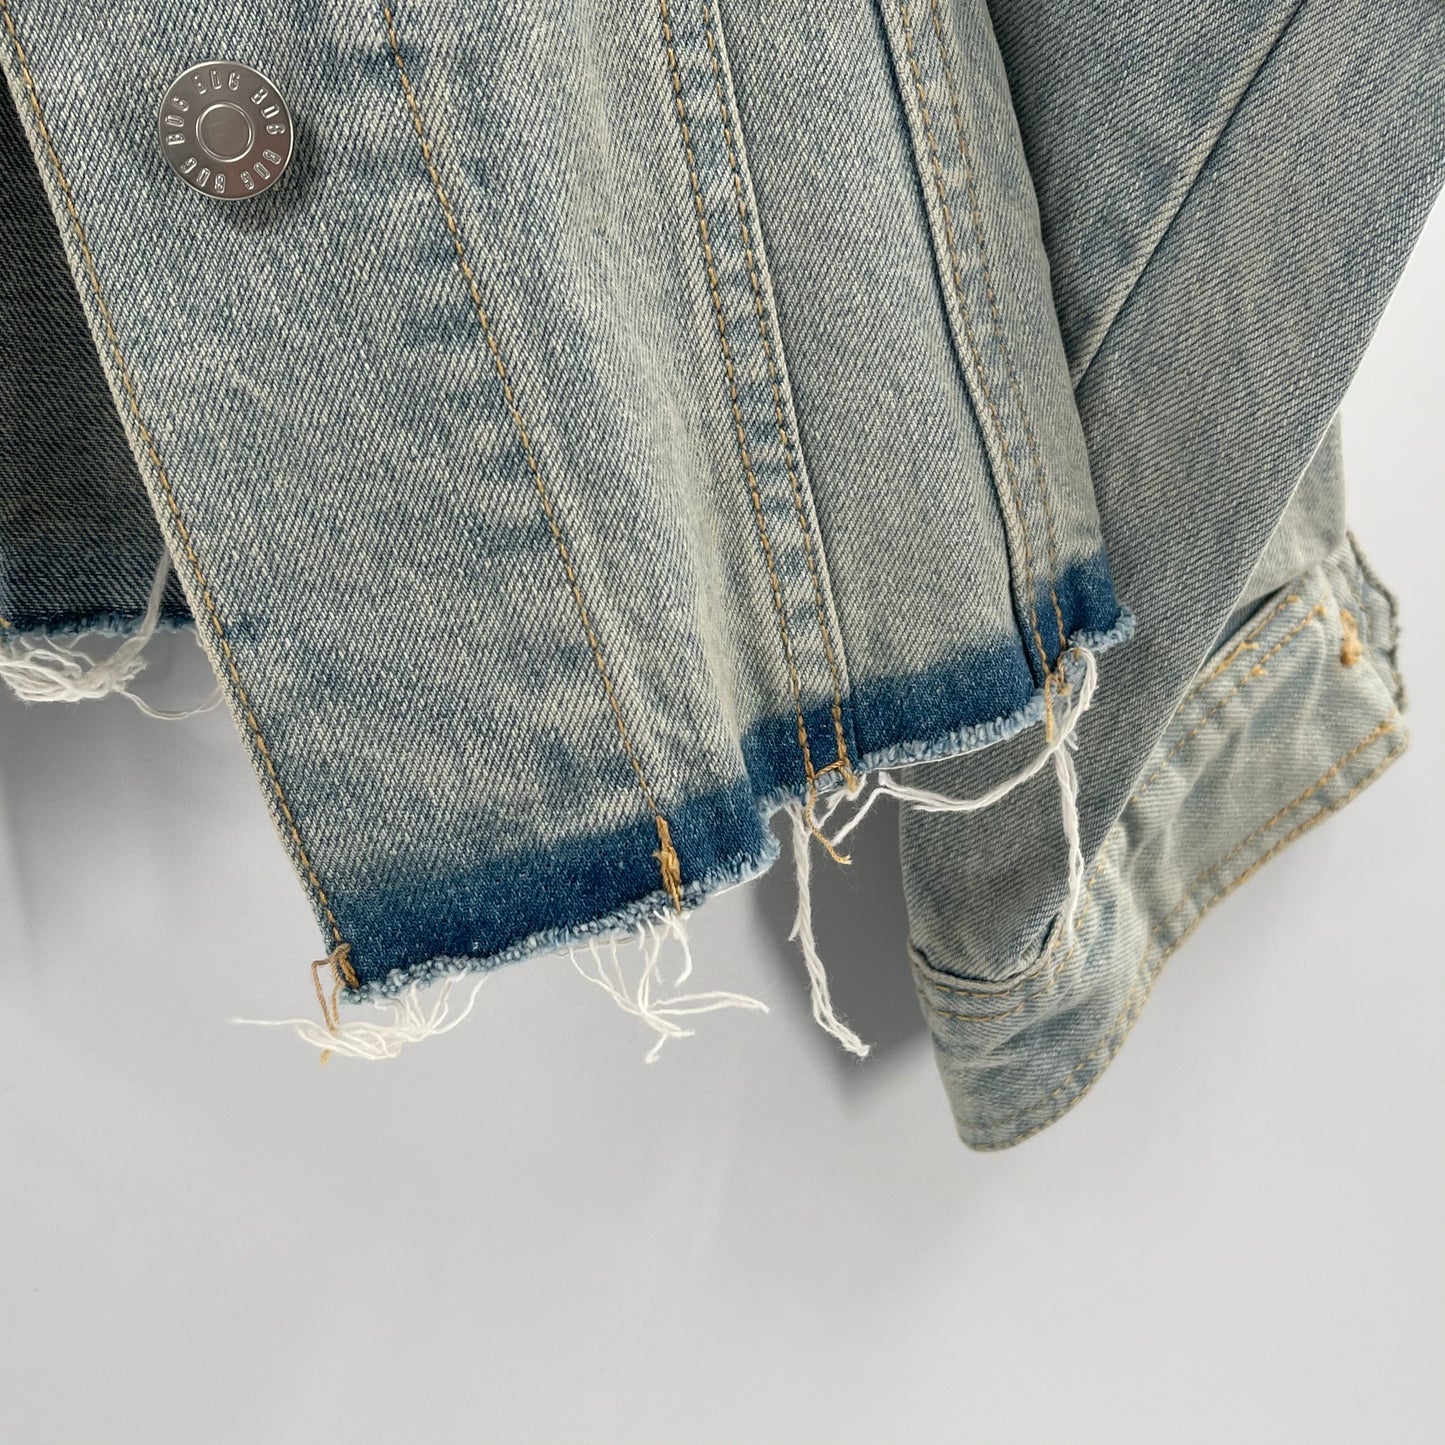 BDG - Urban Outfitters- Light Wash Denim Jacket (Size XS)